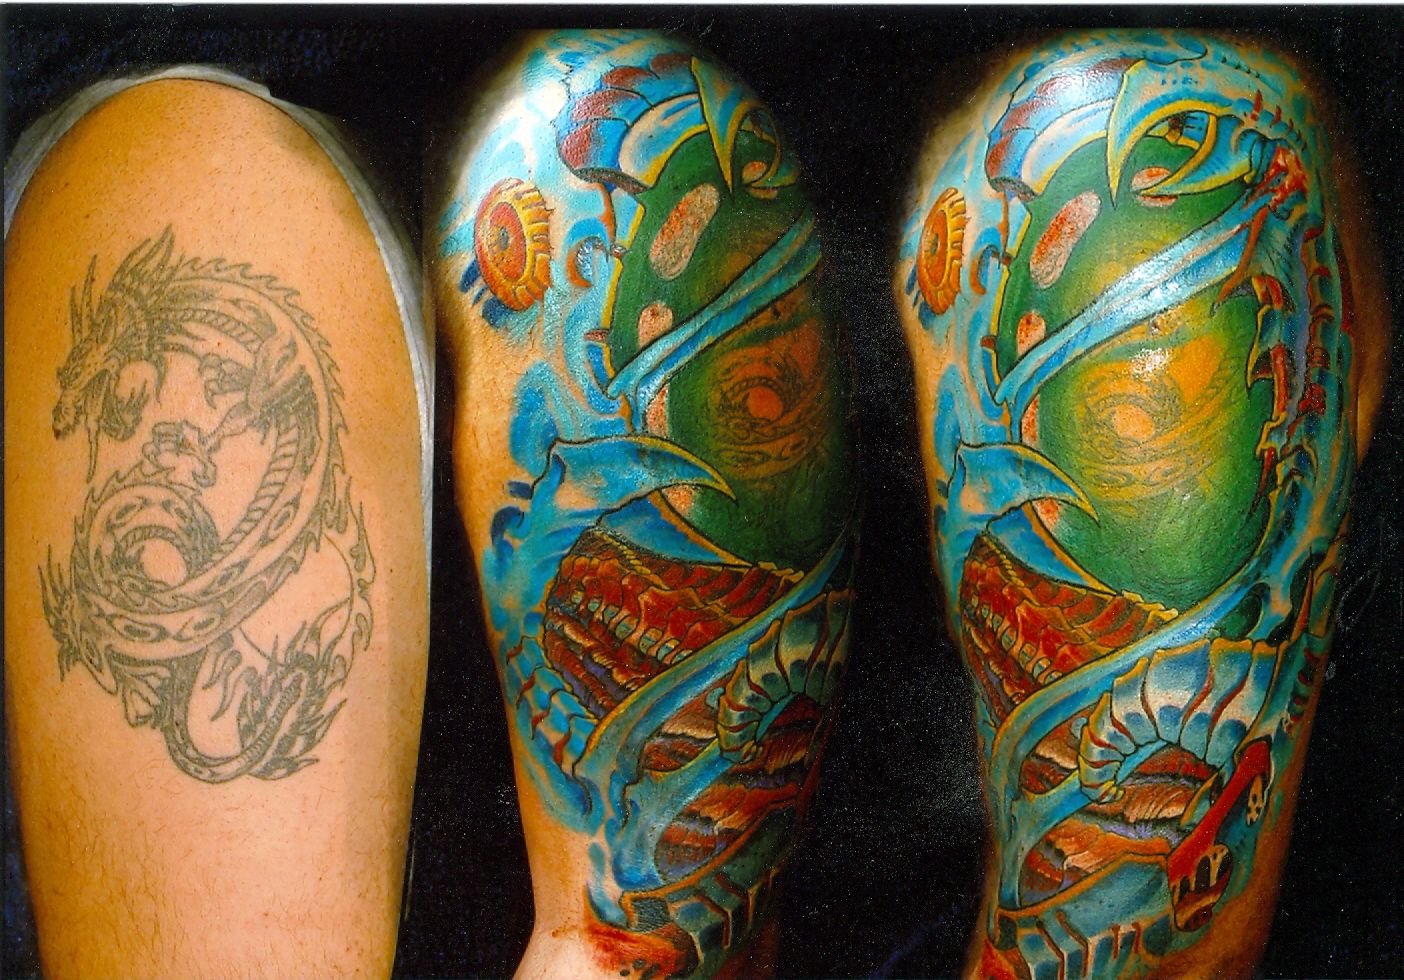 And the cover-up of the dragon